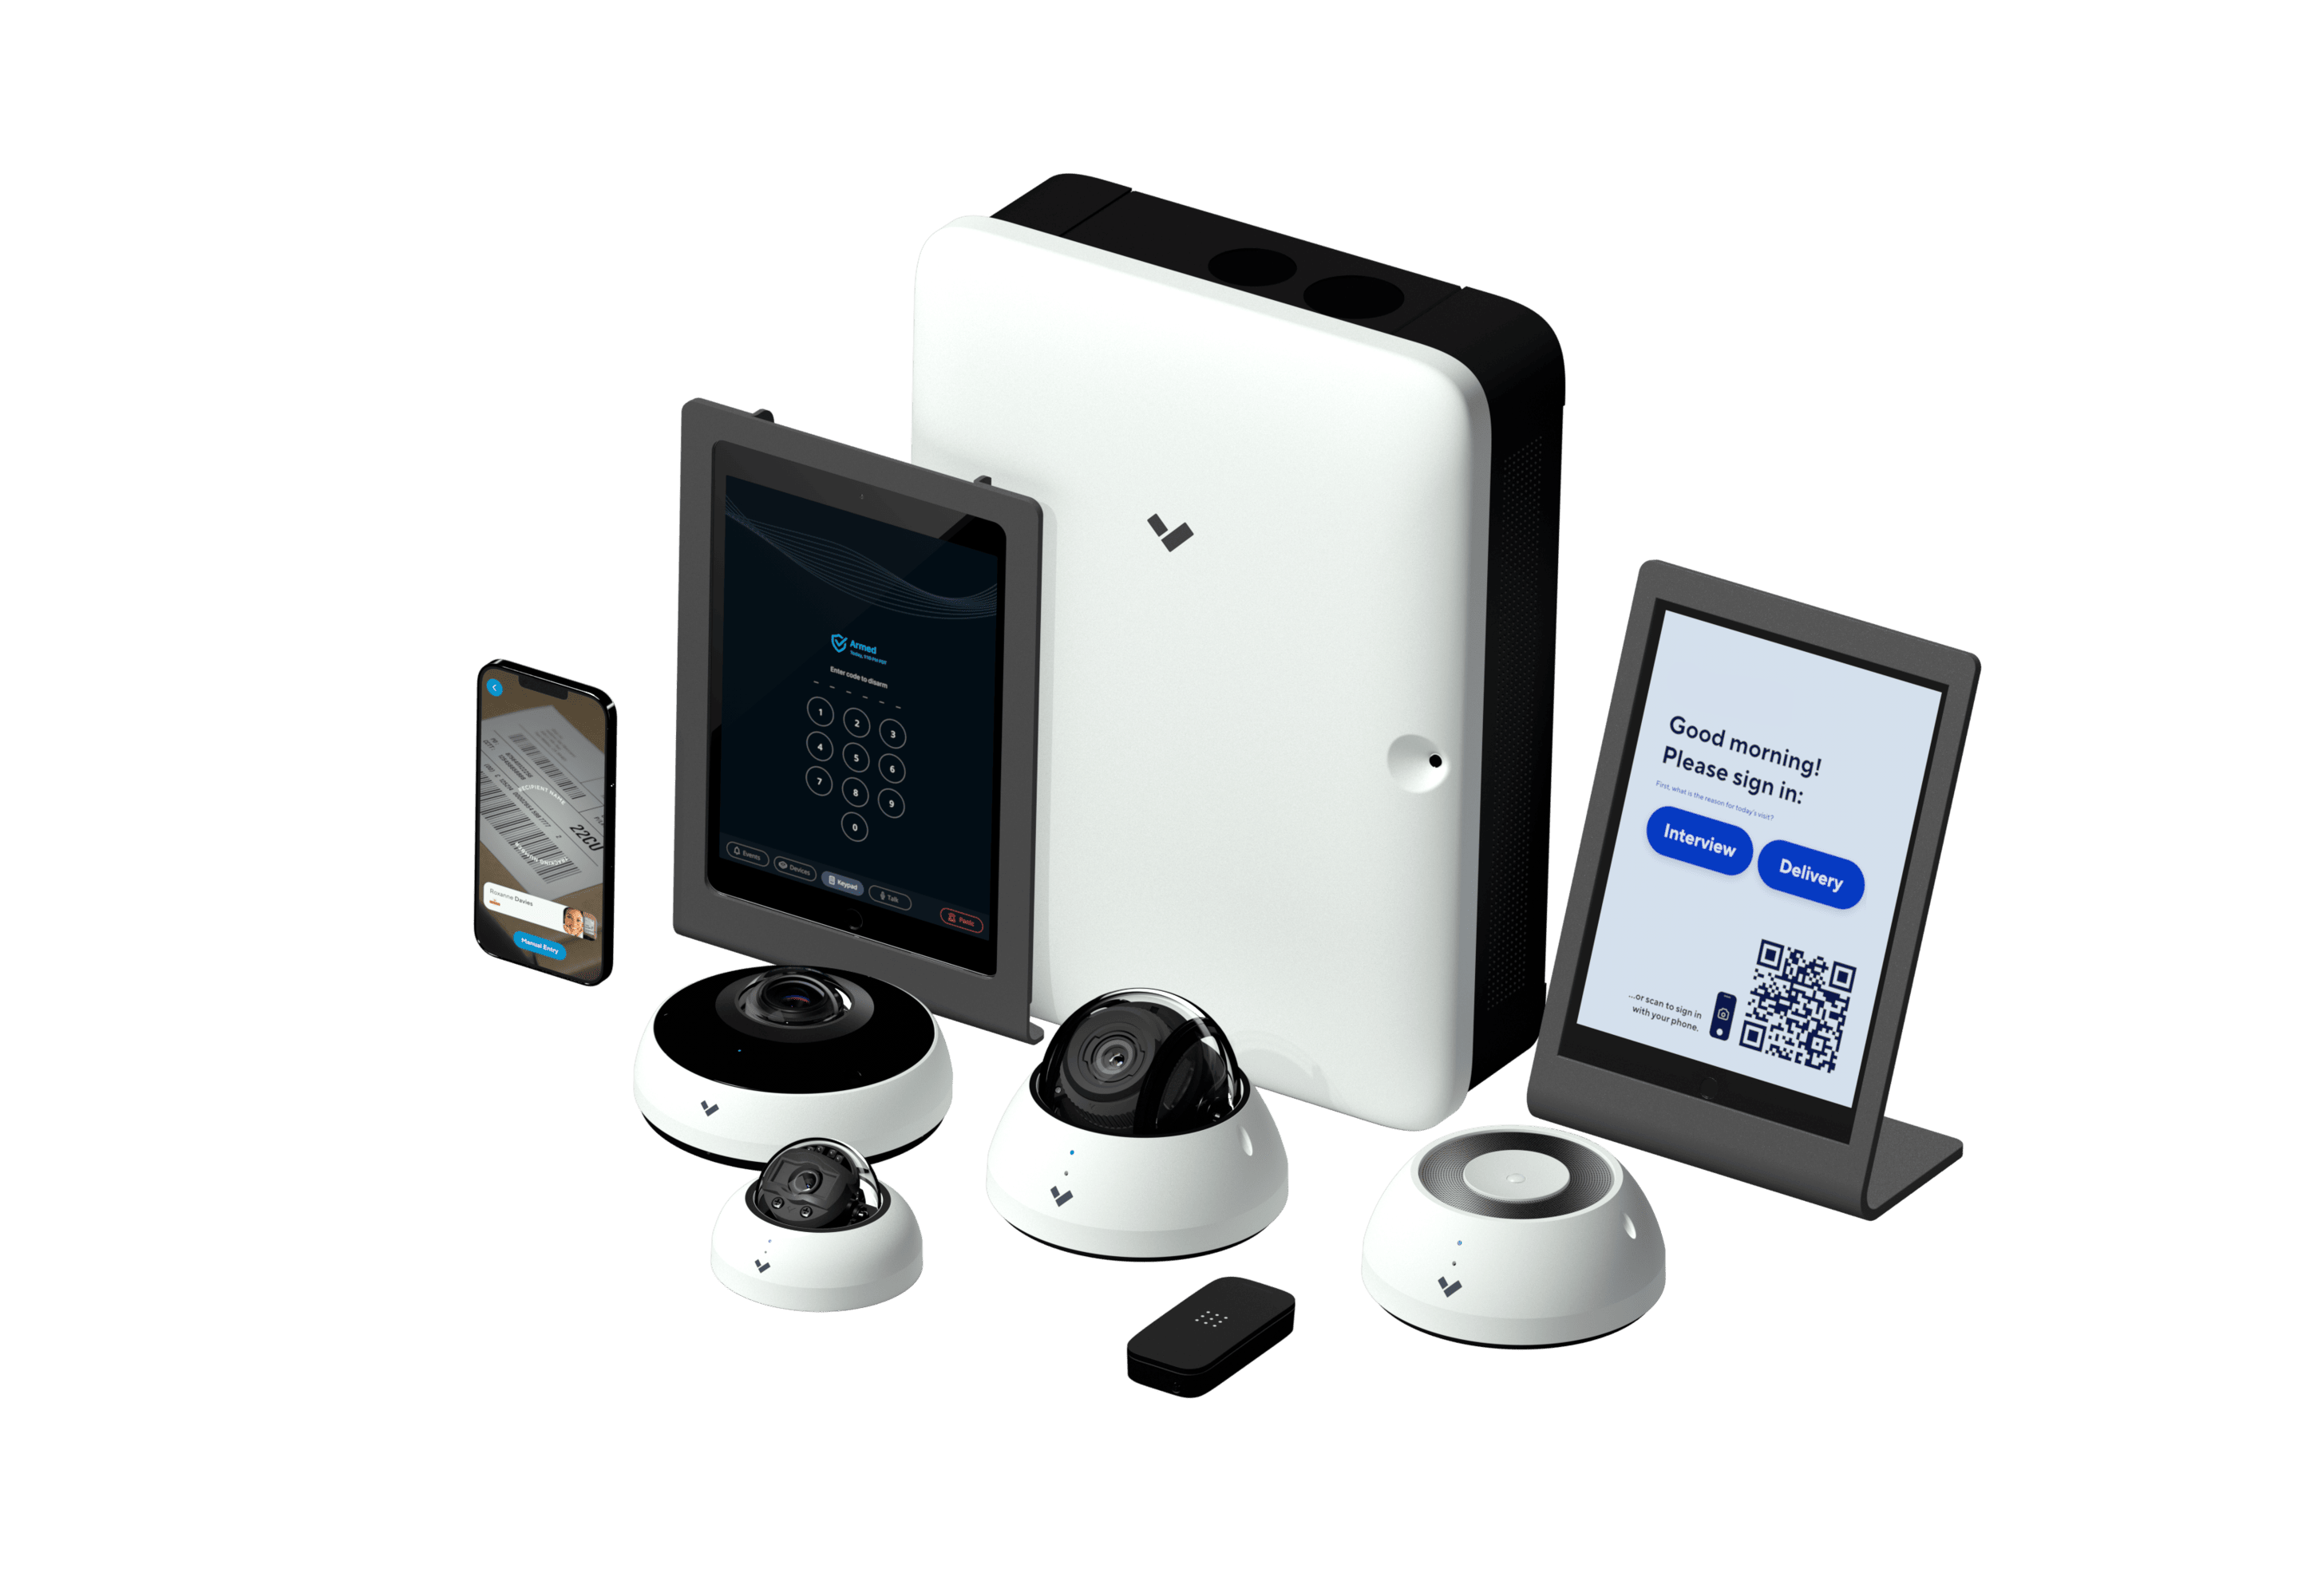 Verkada device family for security camera systems with remote viewing